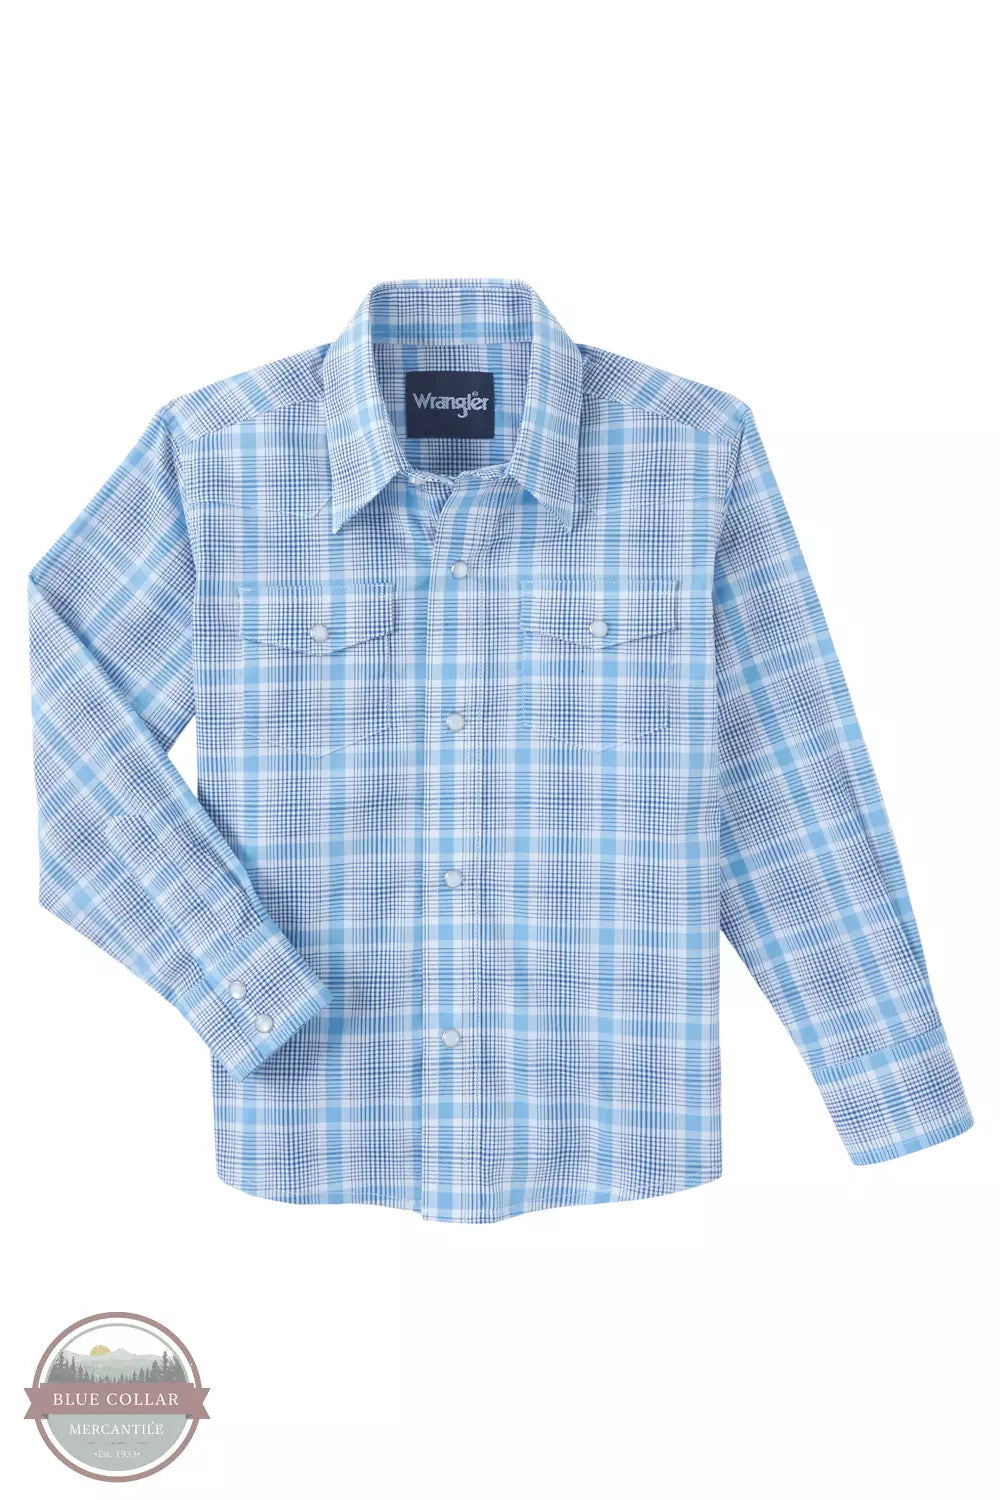 Wrangler 112346280 Blue Plaid Western Snap Shirt Front View